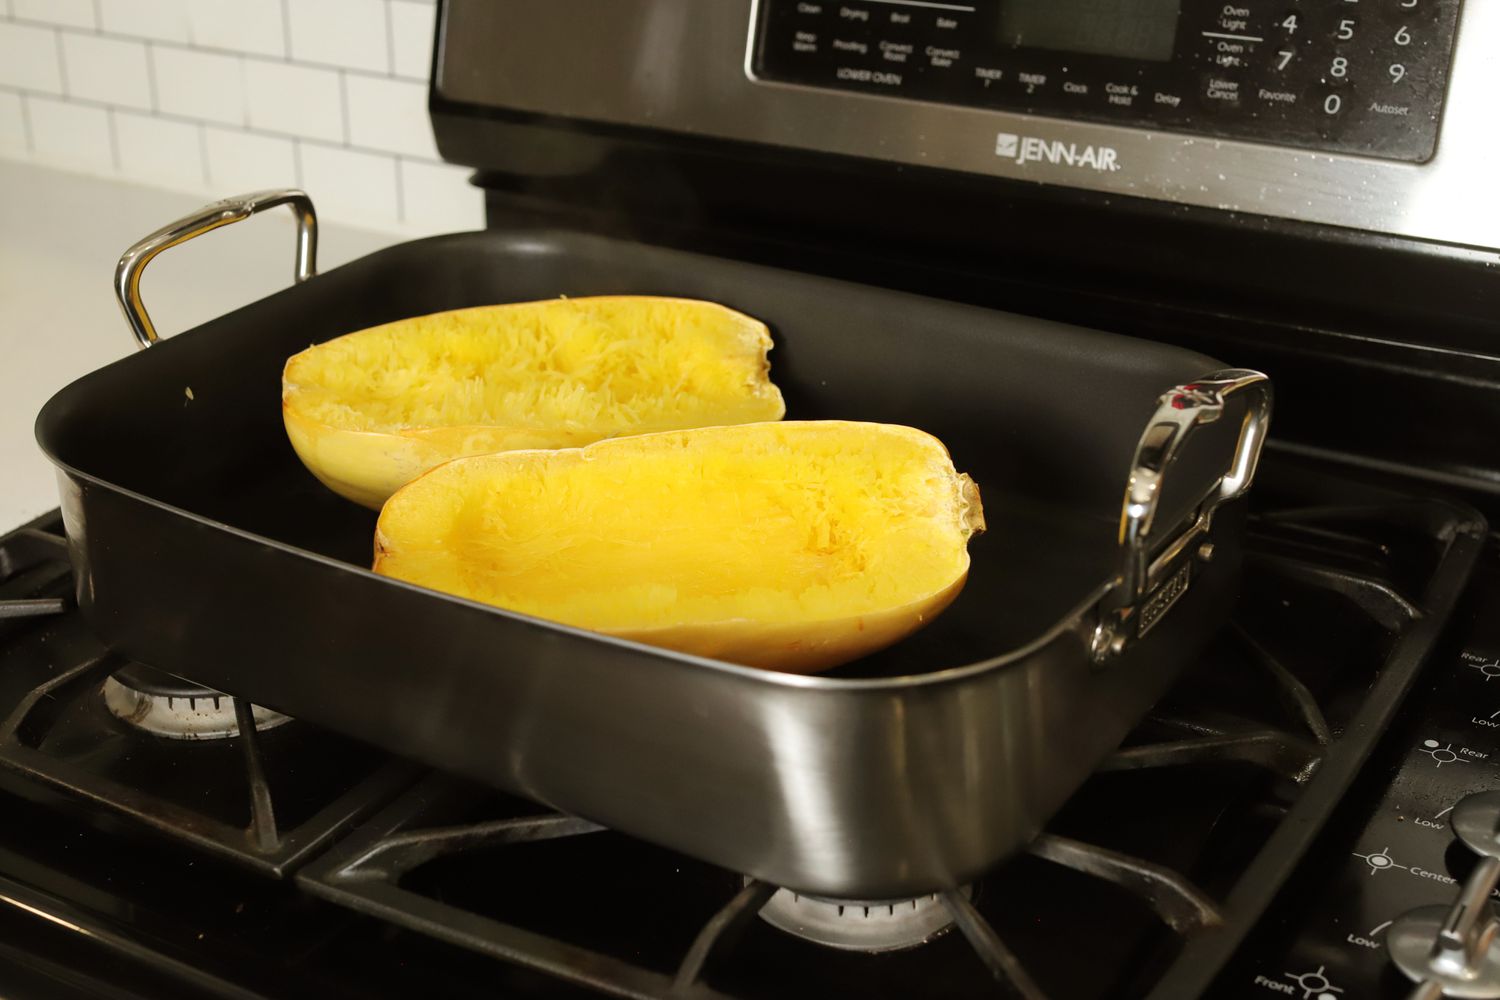 Halved spaghetti squash in the Hestan Stainless Steel Nonstick Roaster, on a gas stove